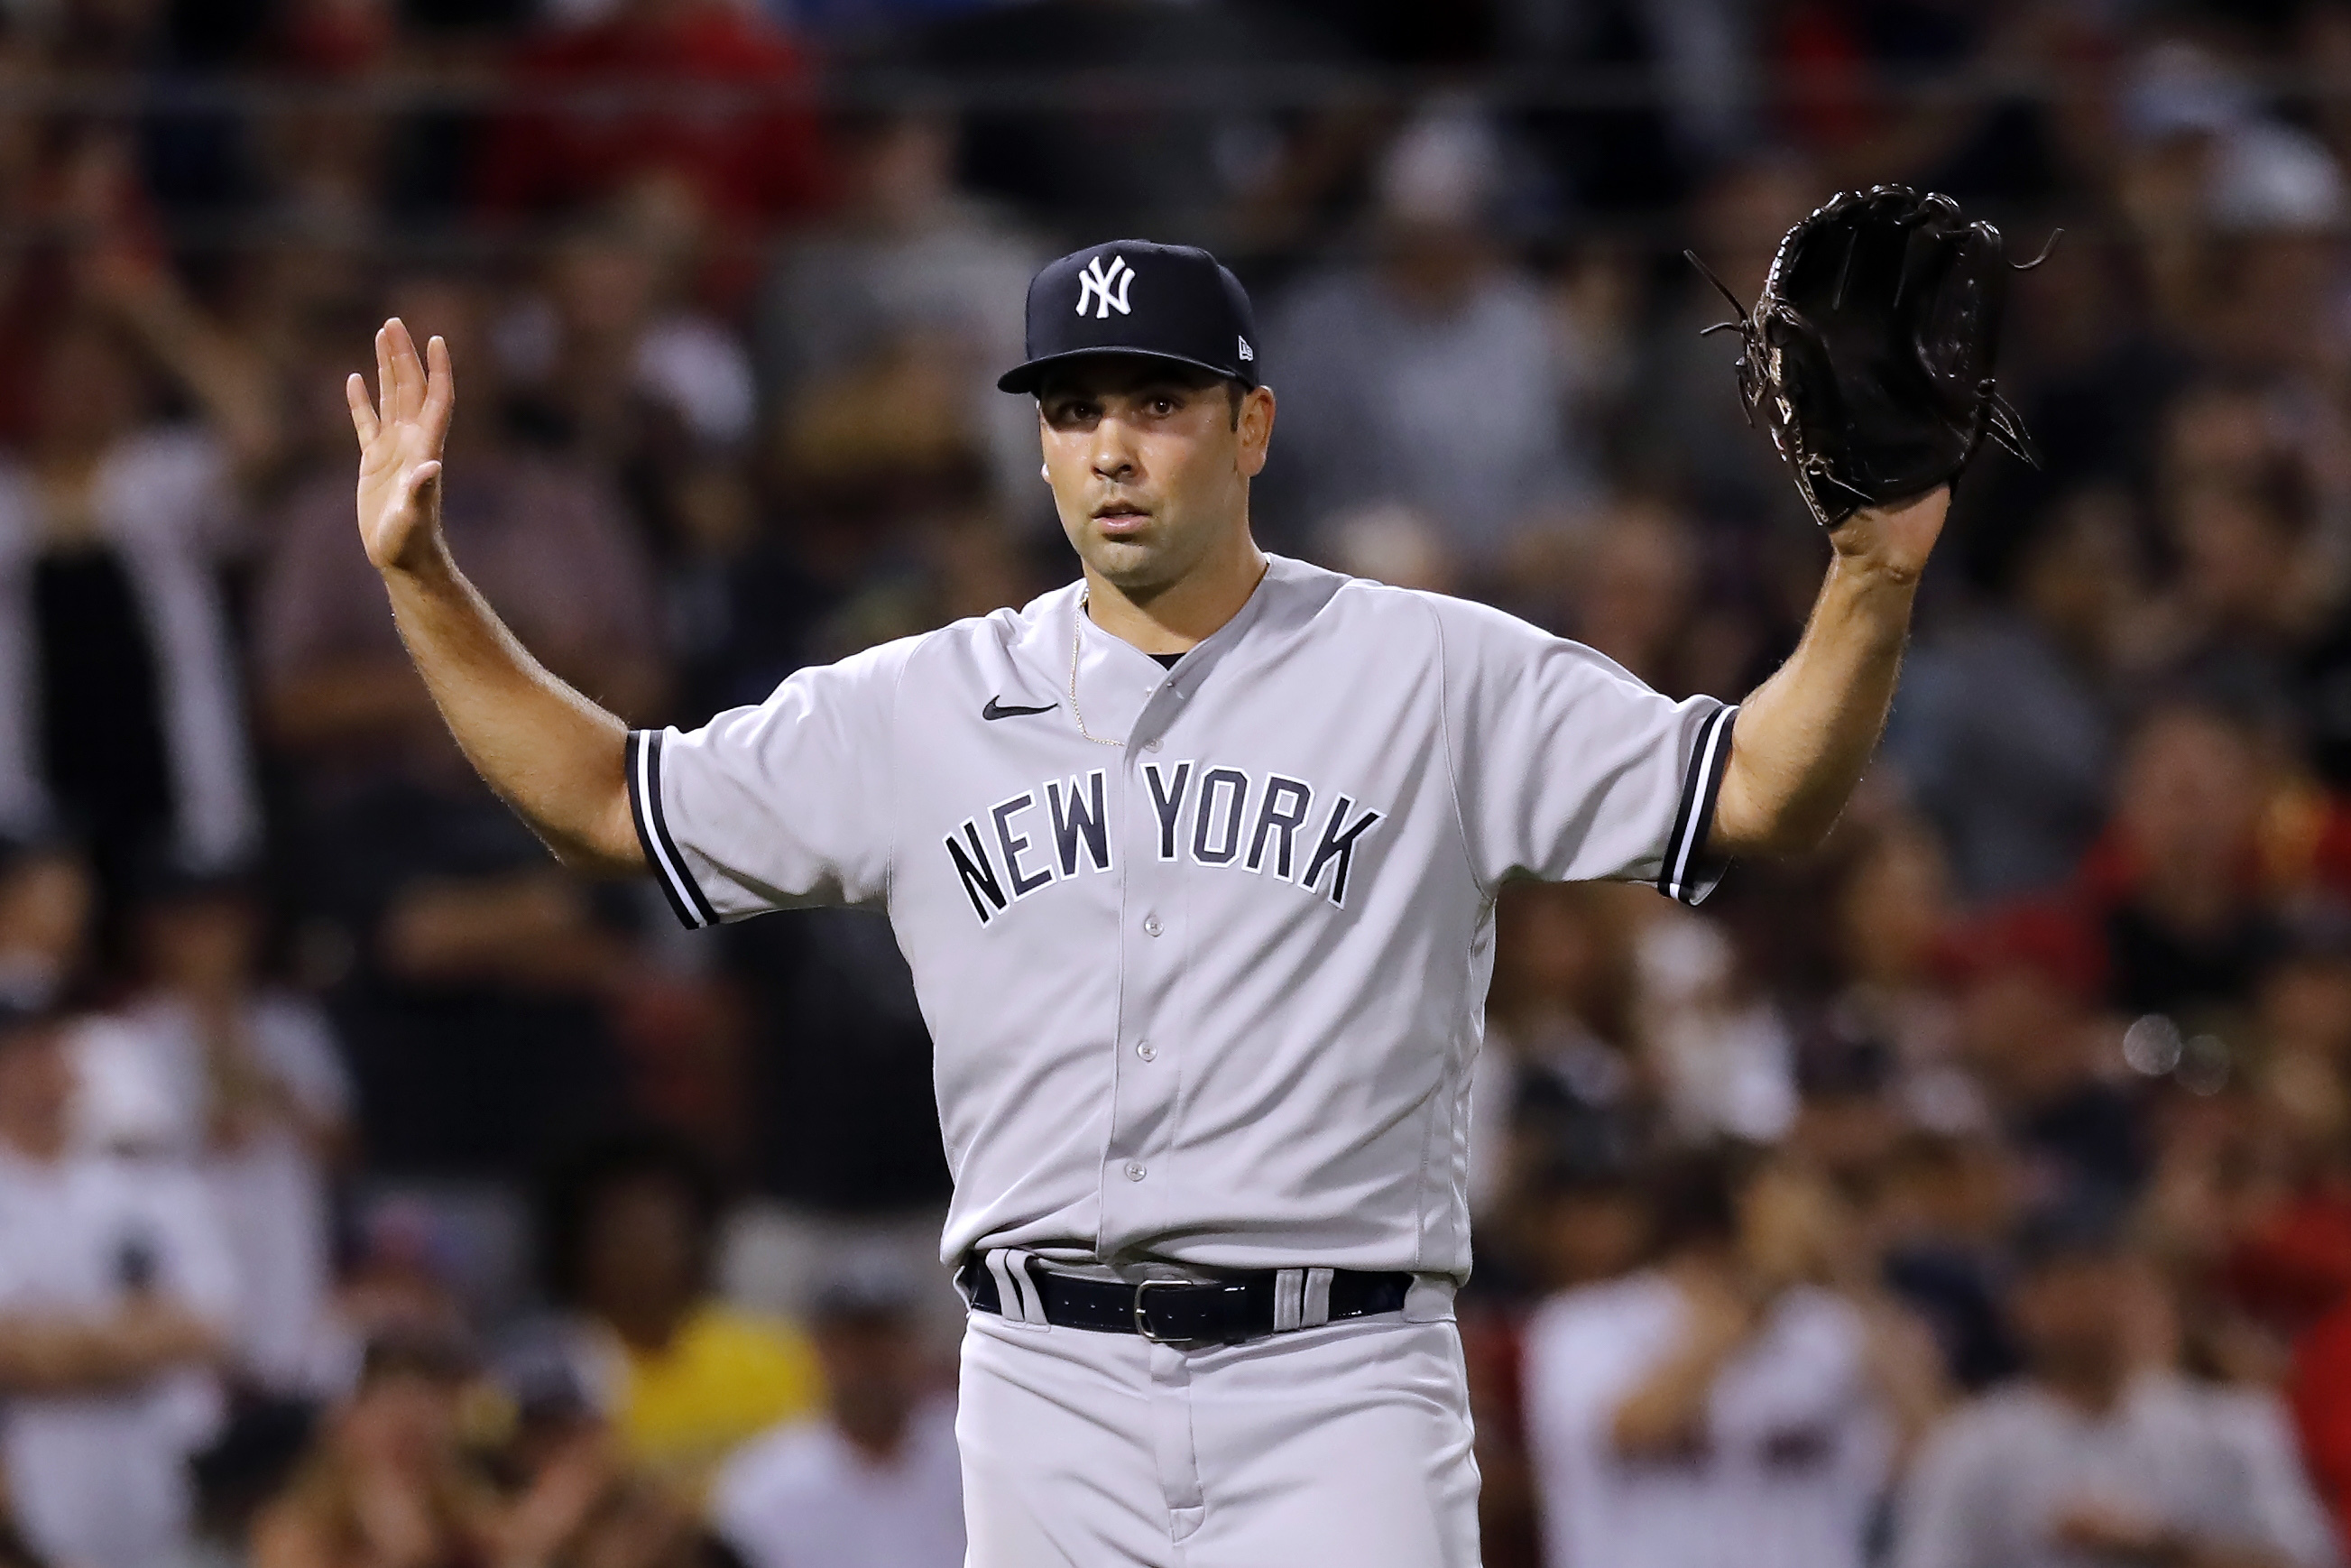 Yankees reliever Trivino warms up in wrong jersey, changes